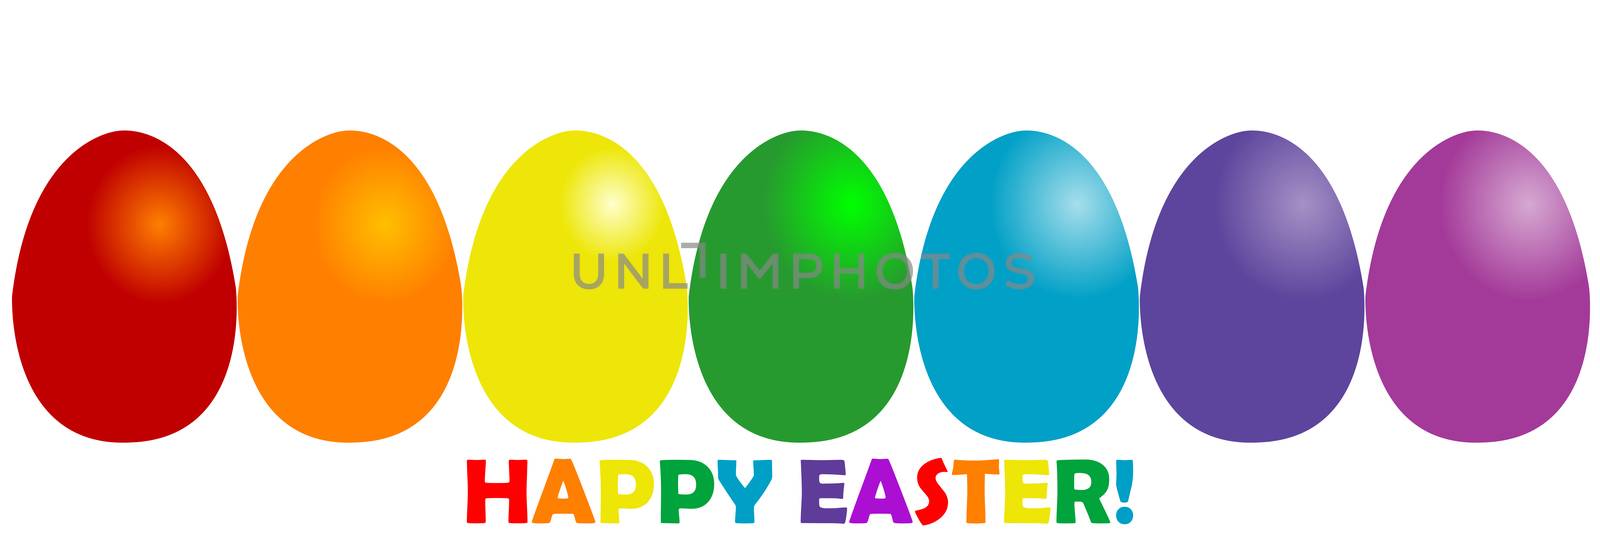 Happy Easter greeting card with rainbow colors eggs by hibrida13